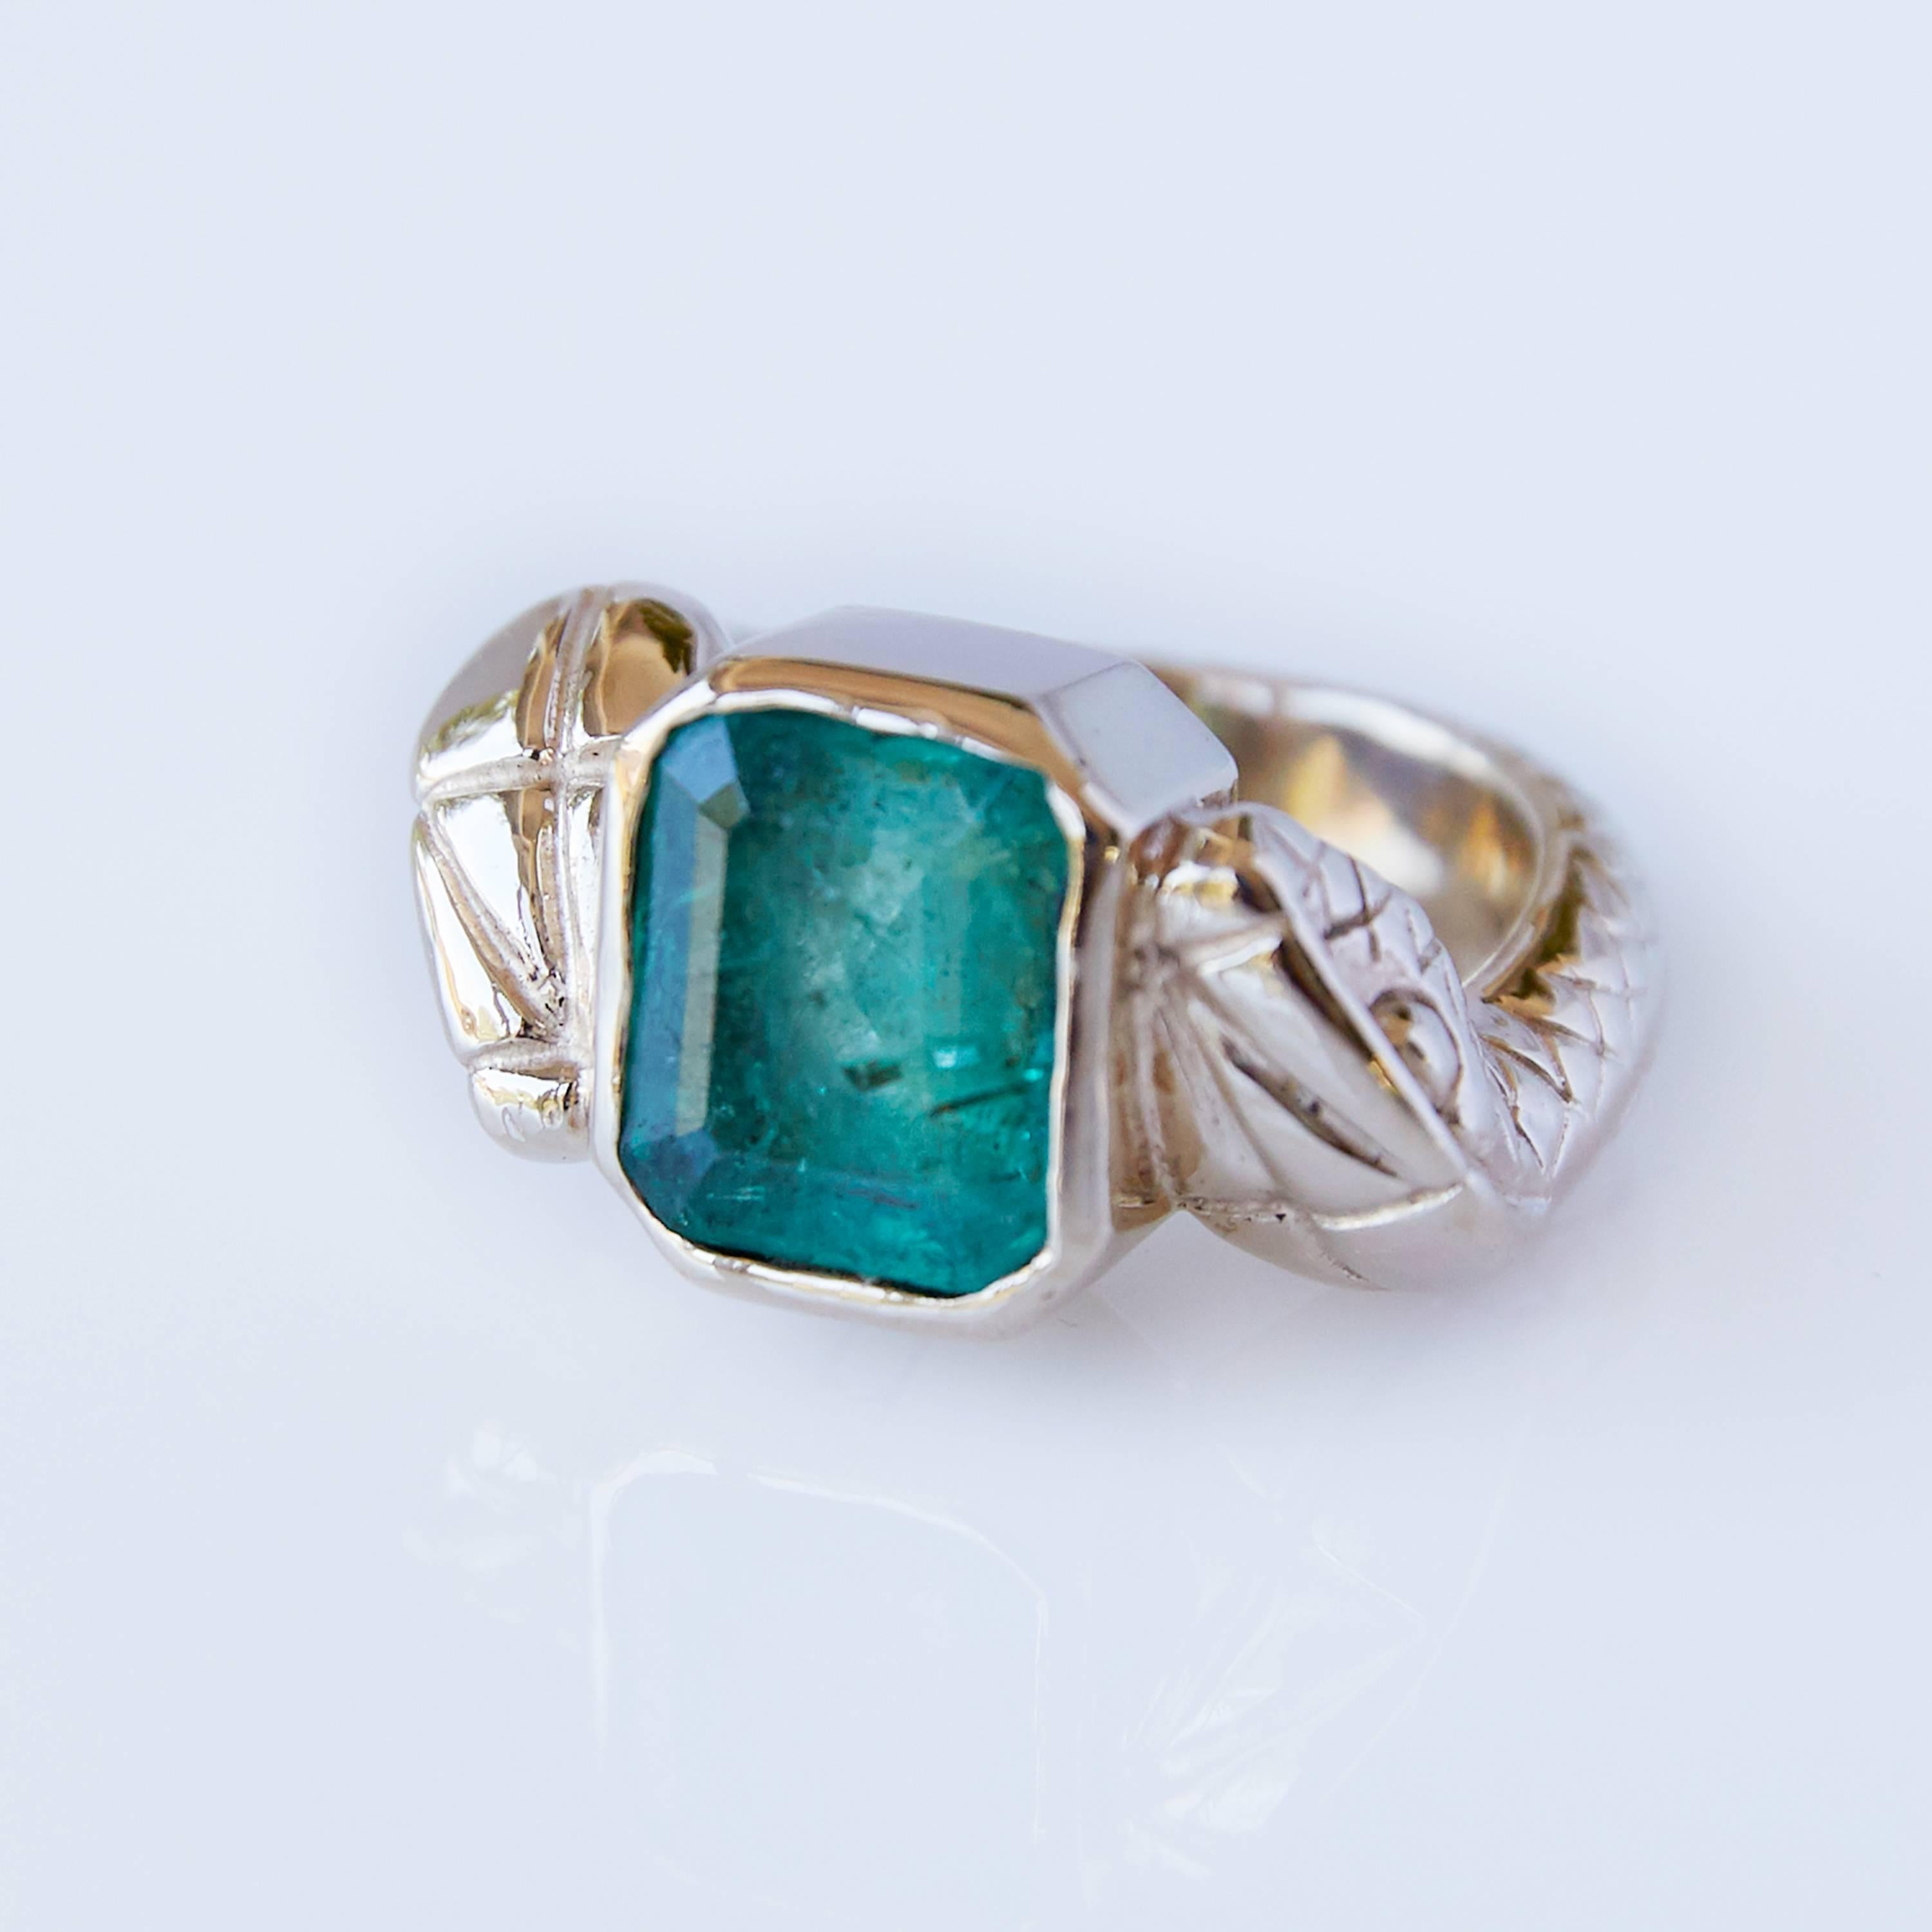 Baguette Cut Emerald Baguette Snake Ring Victorian Style Cocktail Ring J Dauphin For Sale